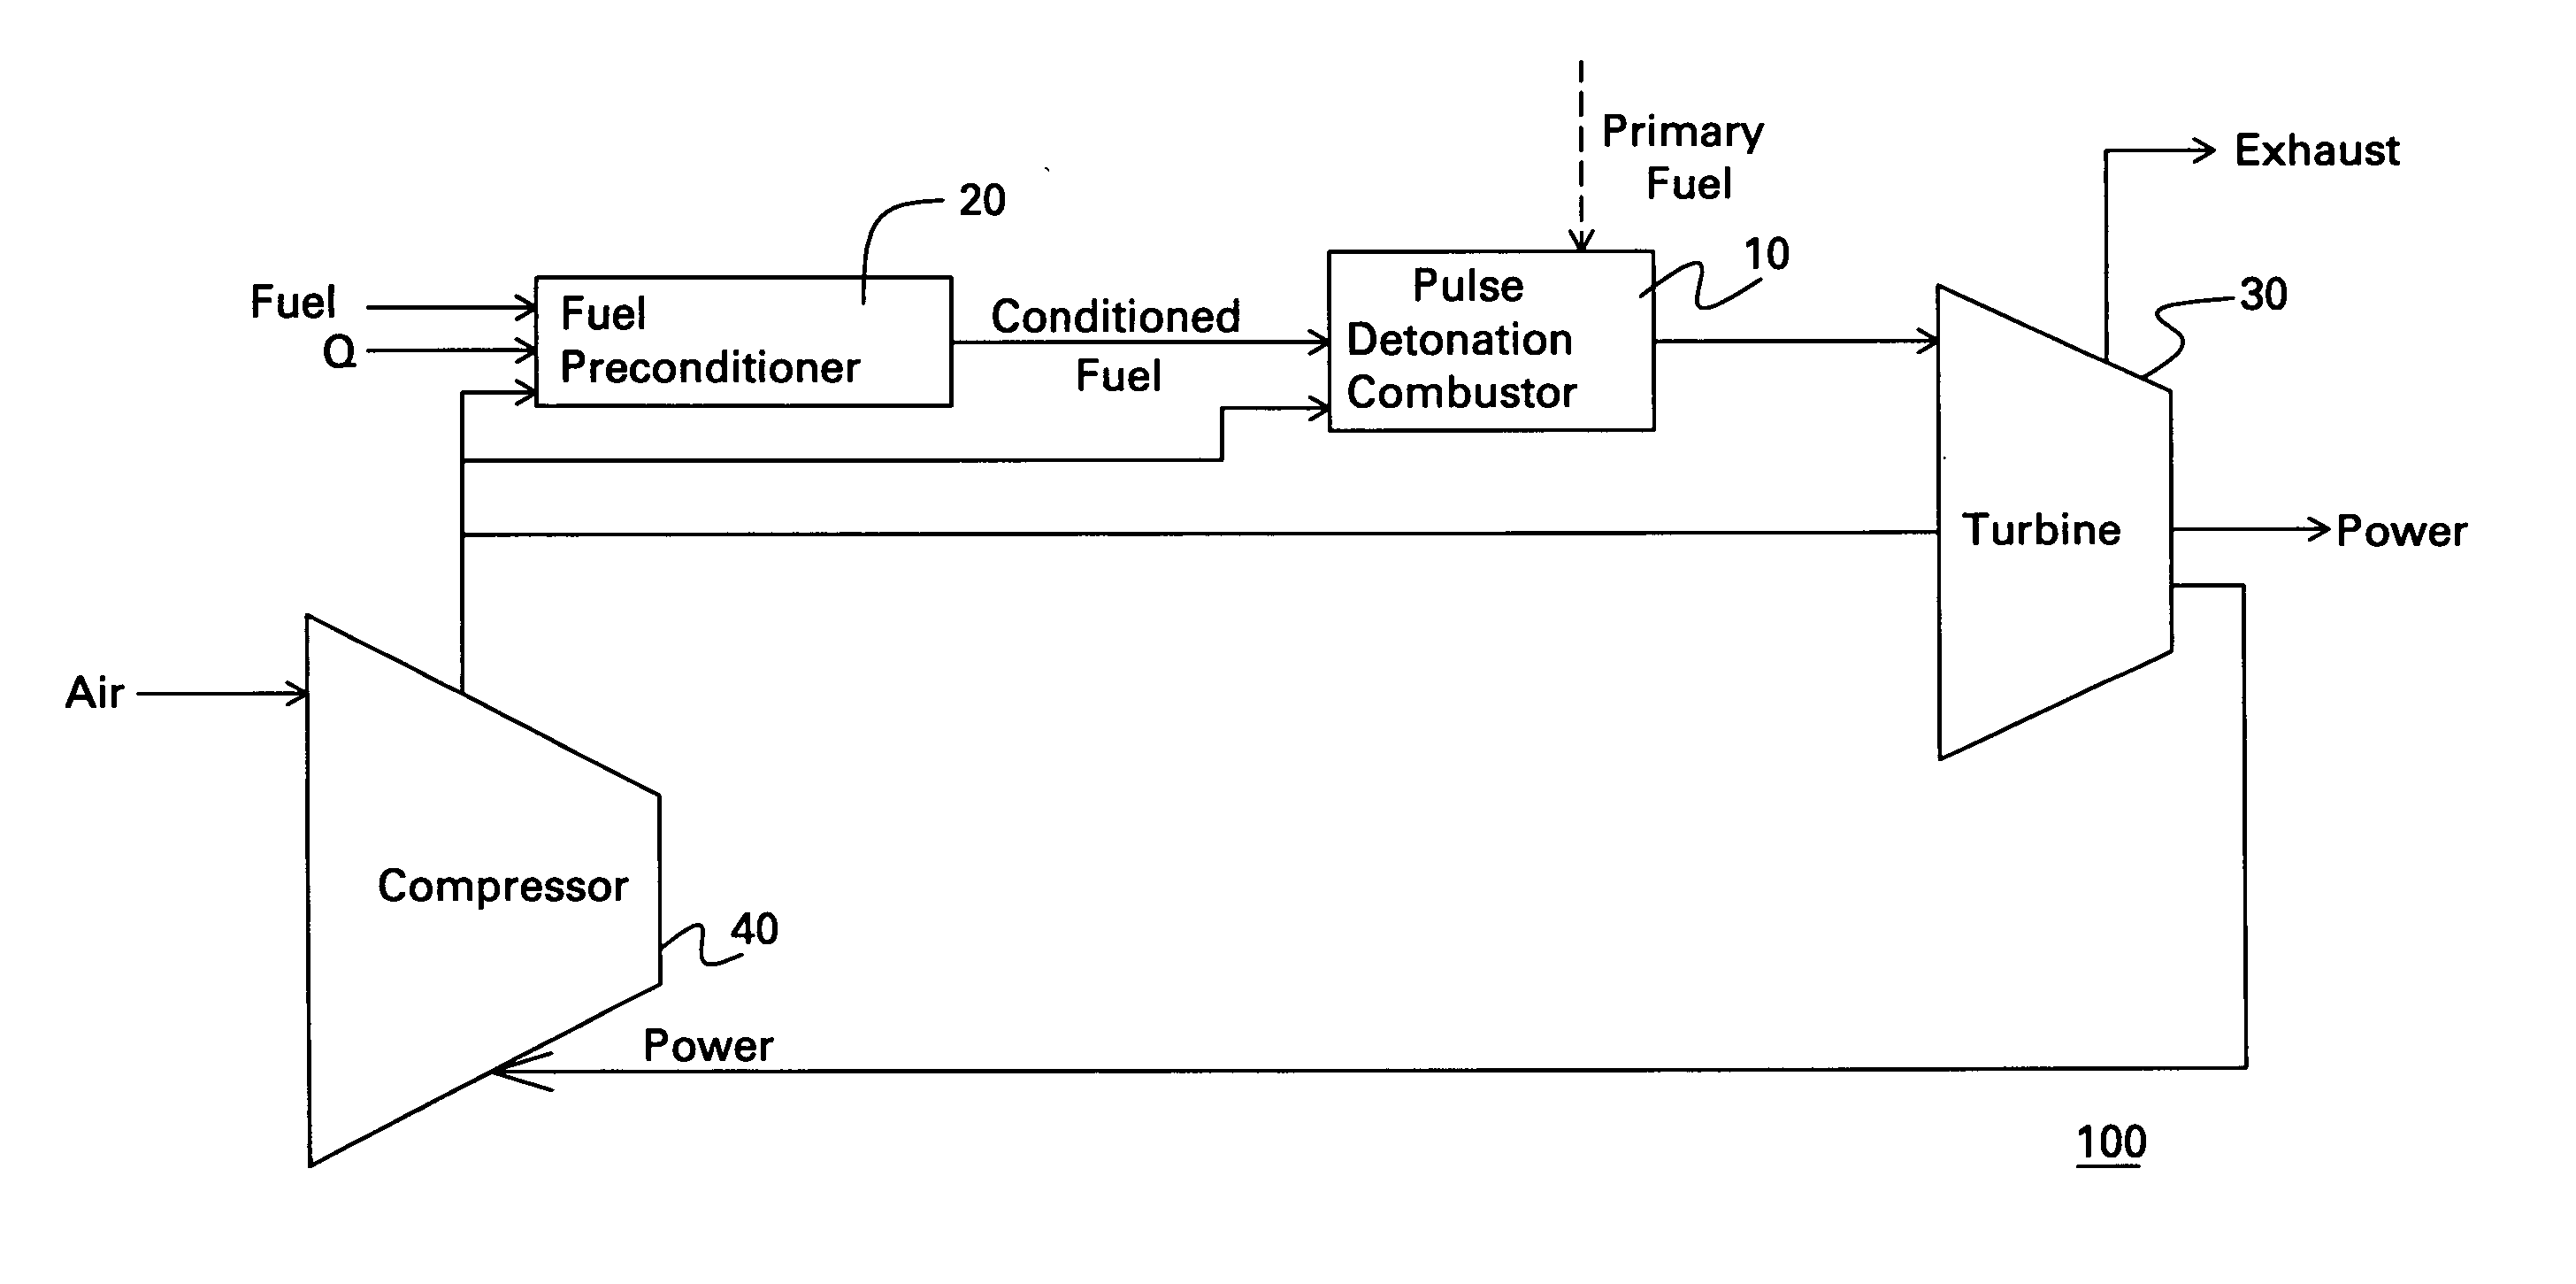 Pulse detonation power system and plant with fuel preconditioning